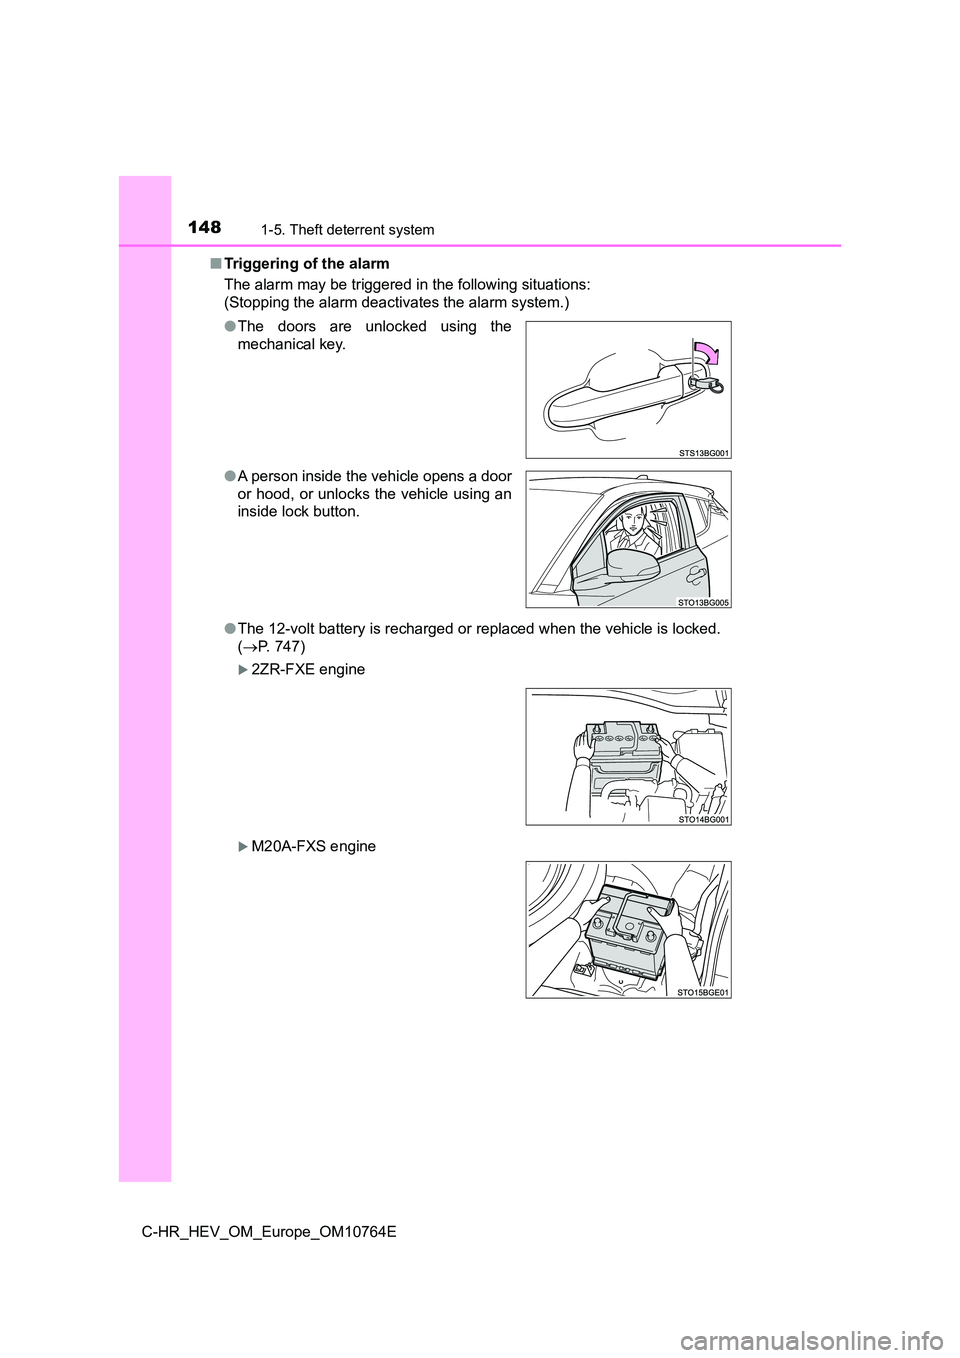 TOYOTA C-HR 2023 User Guide 1481-5. Theft deterrent system
C-HR_HEV_OM_Europe_OM10764E 
■ Triggering of the alarm 
The alarm may be triggered in the following situations: 
(Stopping the alarm deactivates the alarm system.) 
�